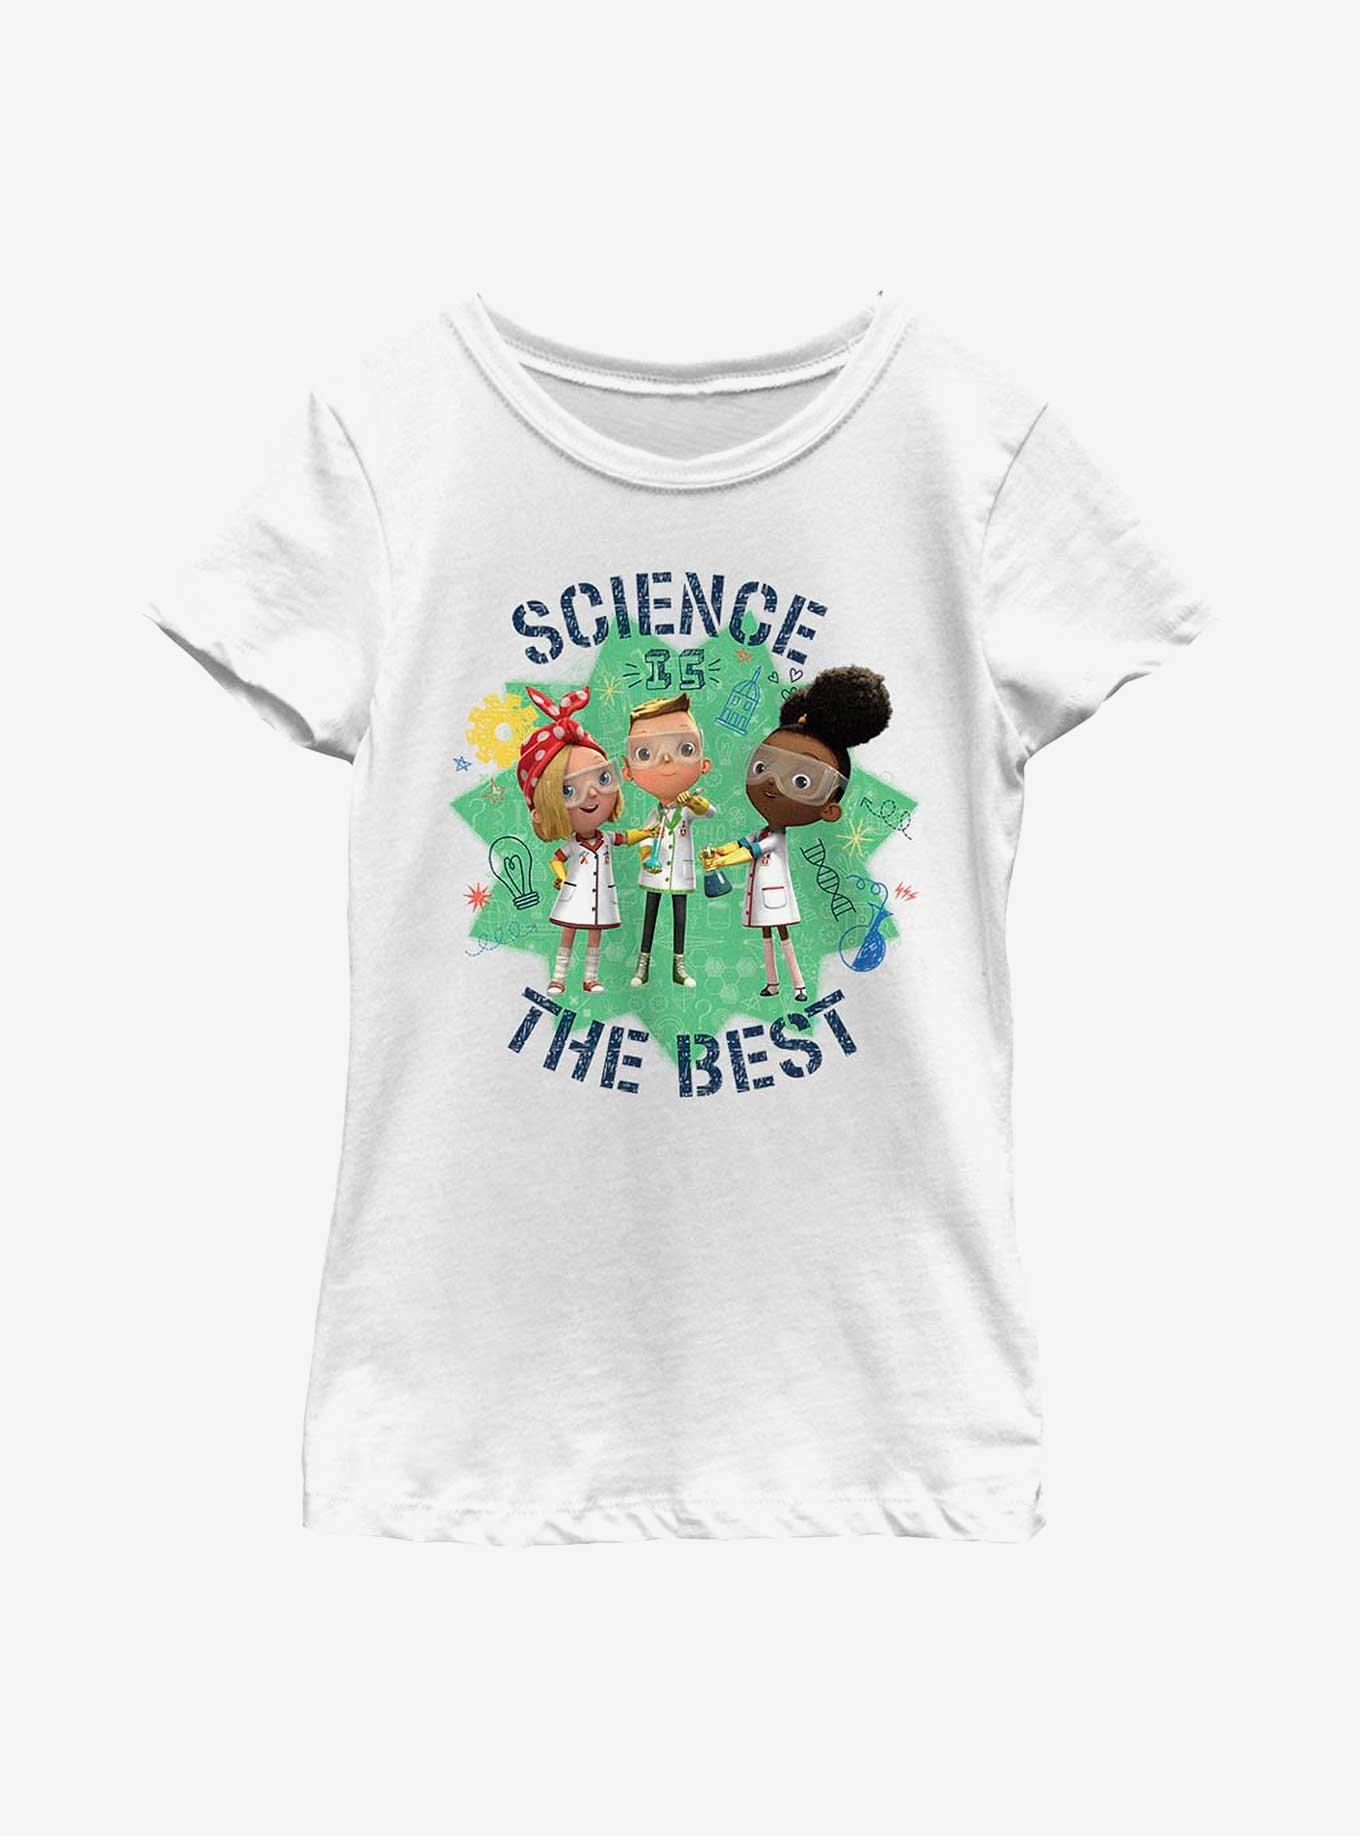 Ada Twist, Scientist Science Is The Best Youth Girls T-Shirt, WHITE, hi-res